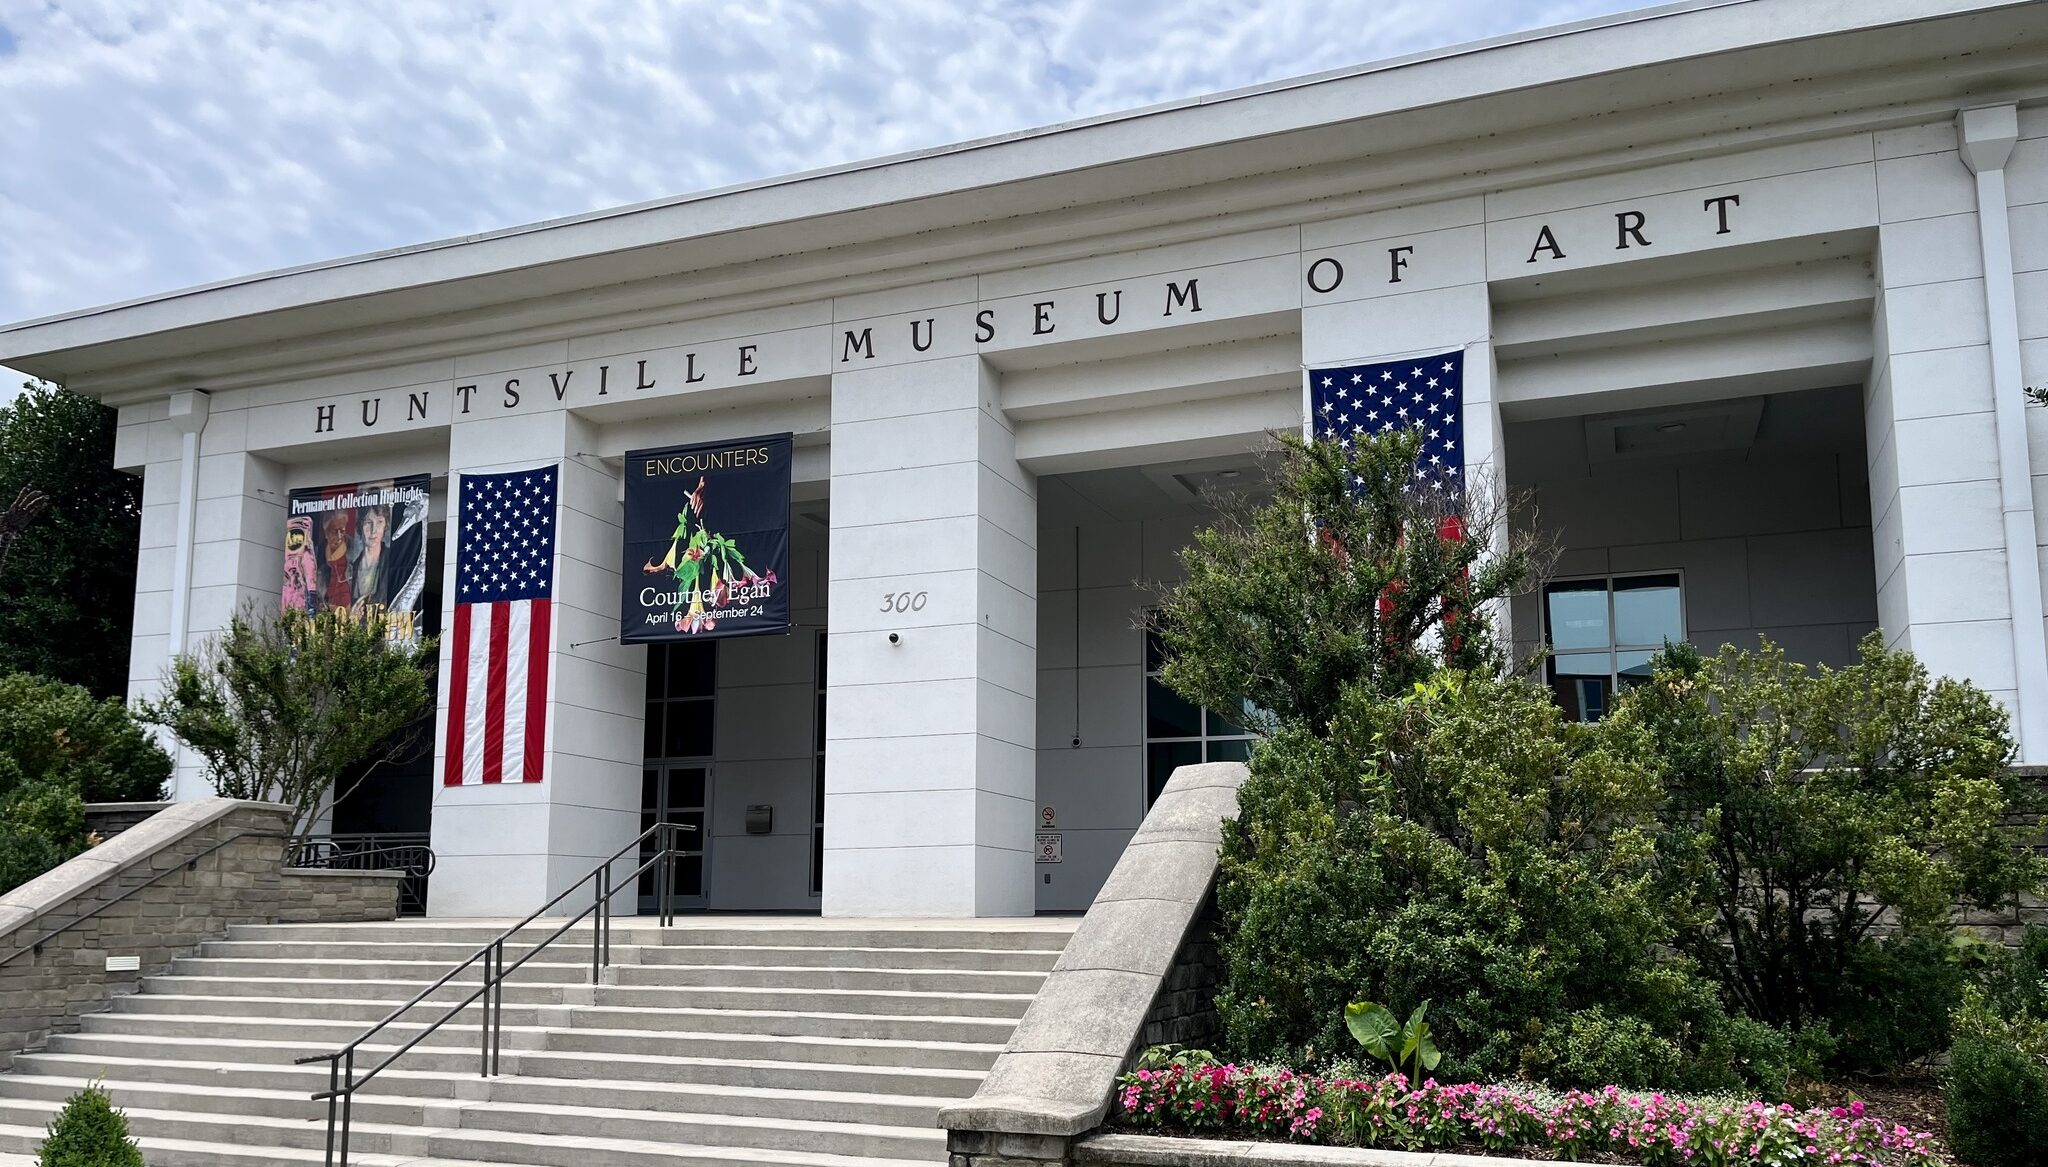 Freedom Free Admission To Huntsville Museum Of Art 256 Today